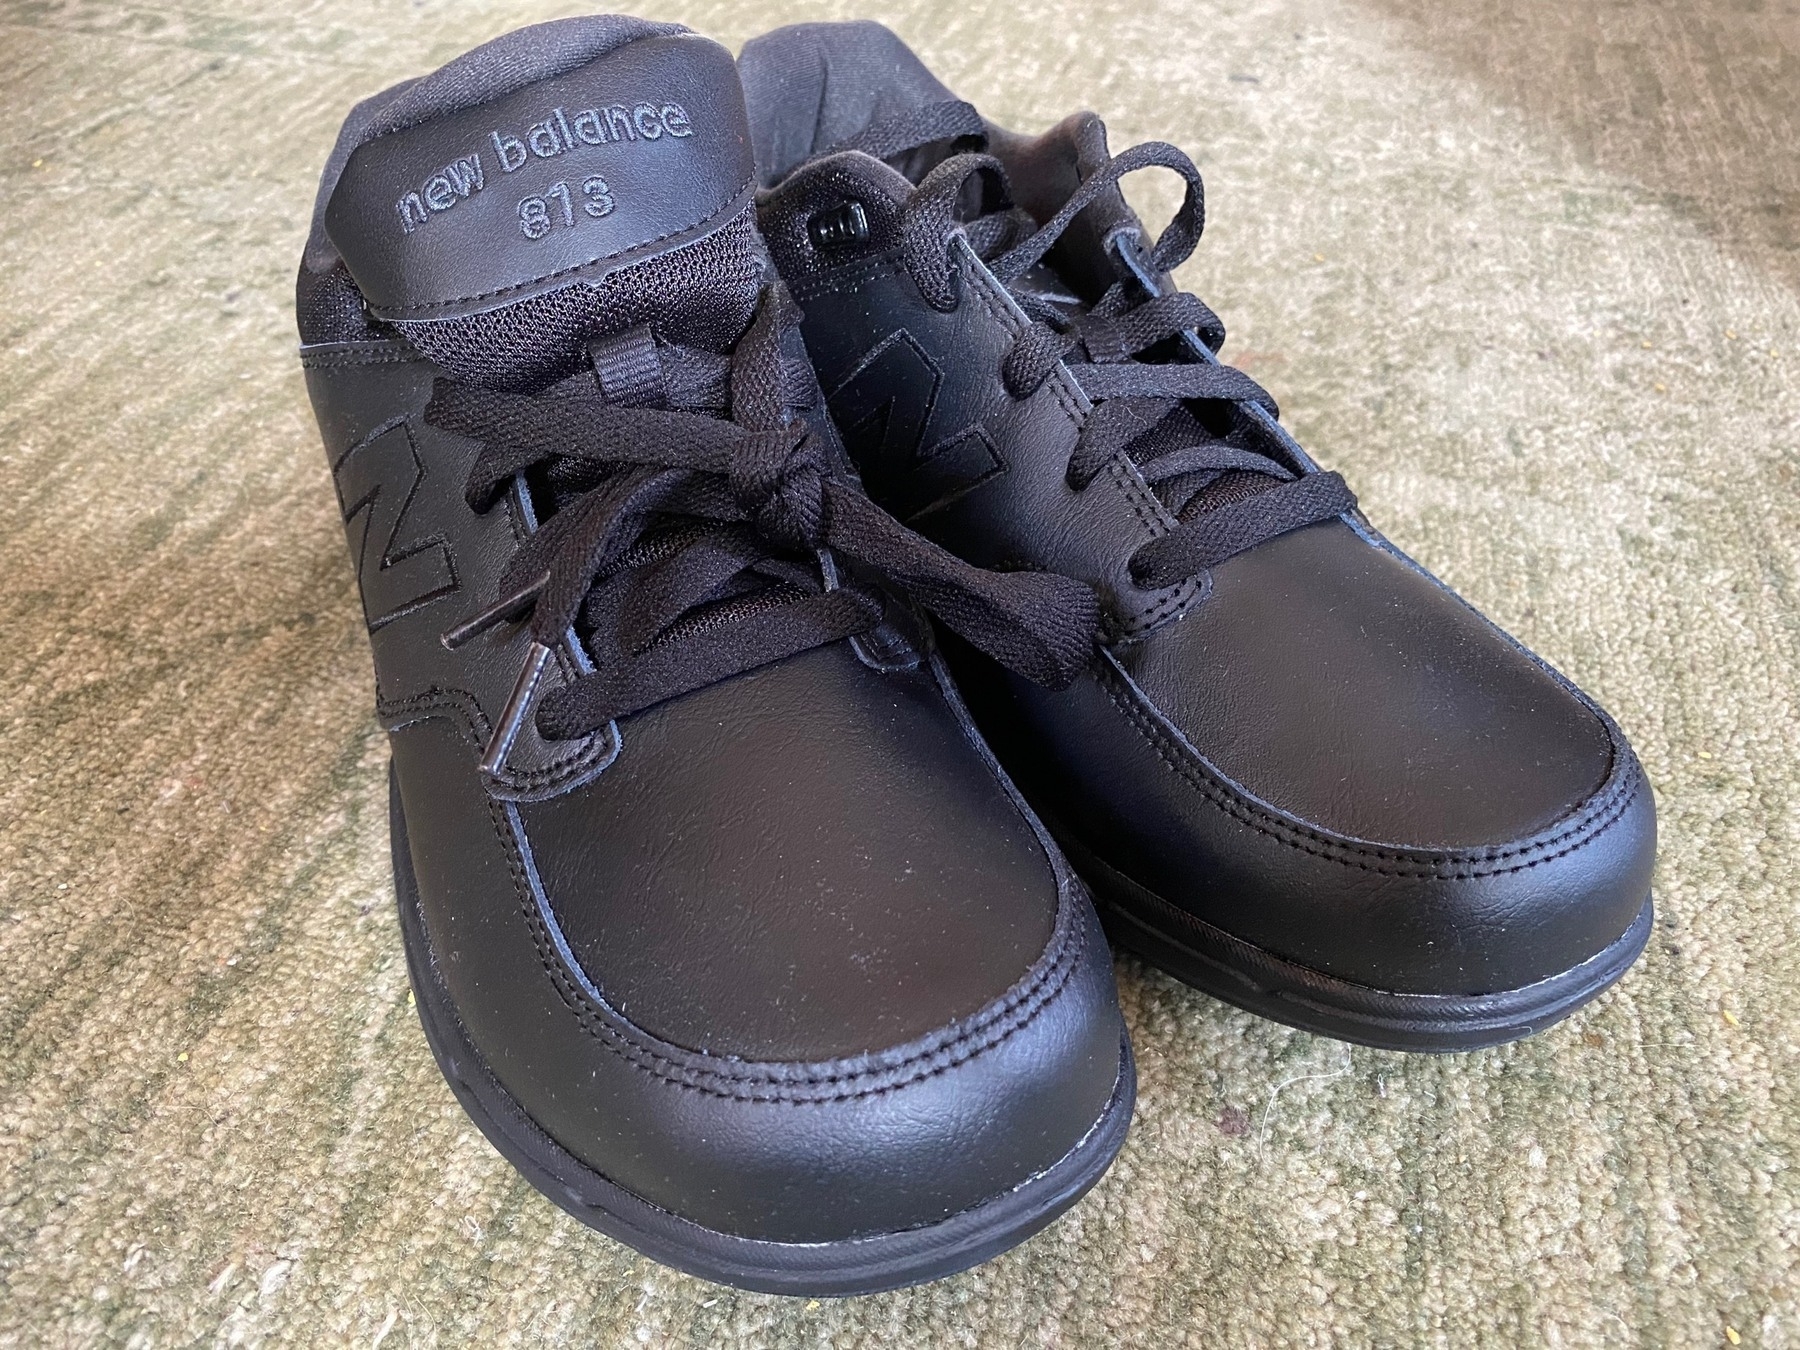 Pair of brand new black walking shoes.